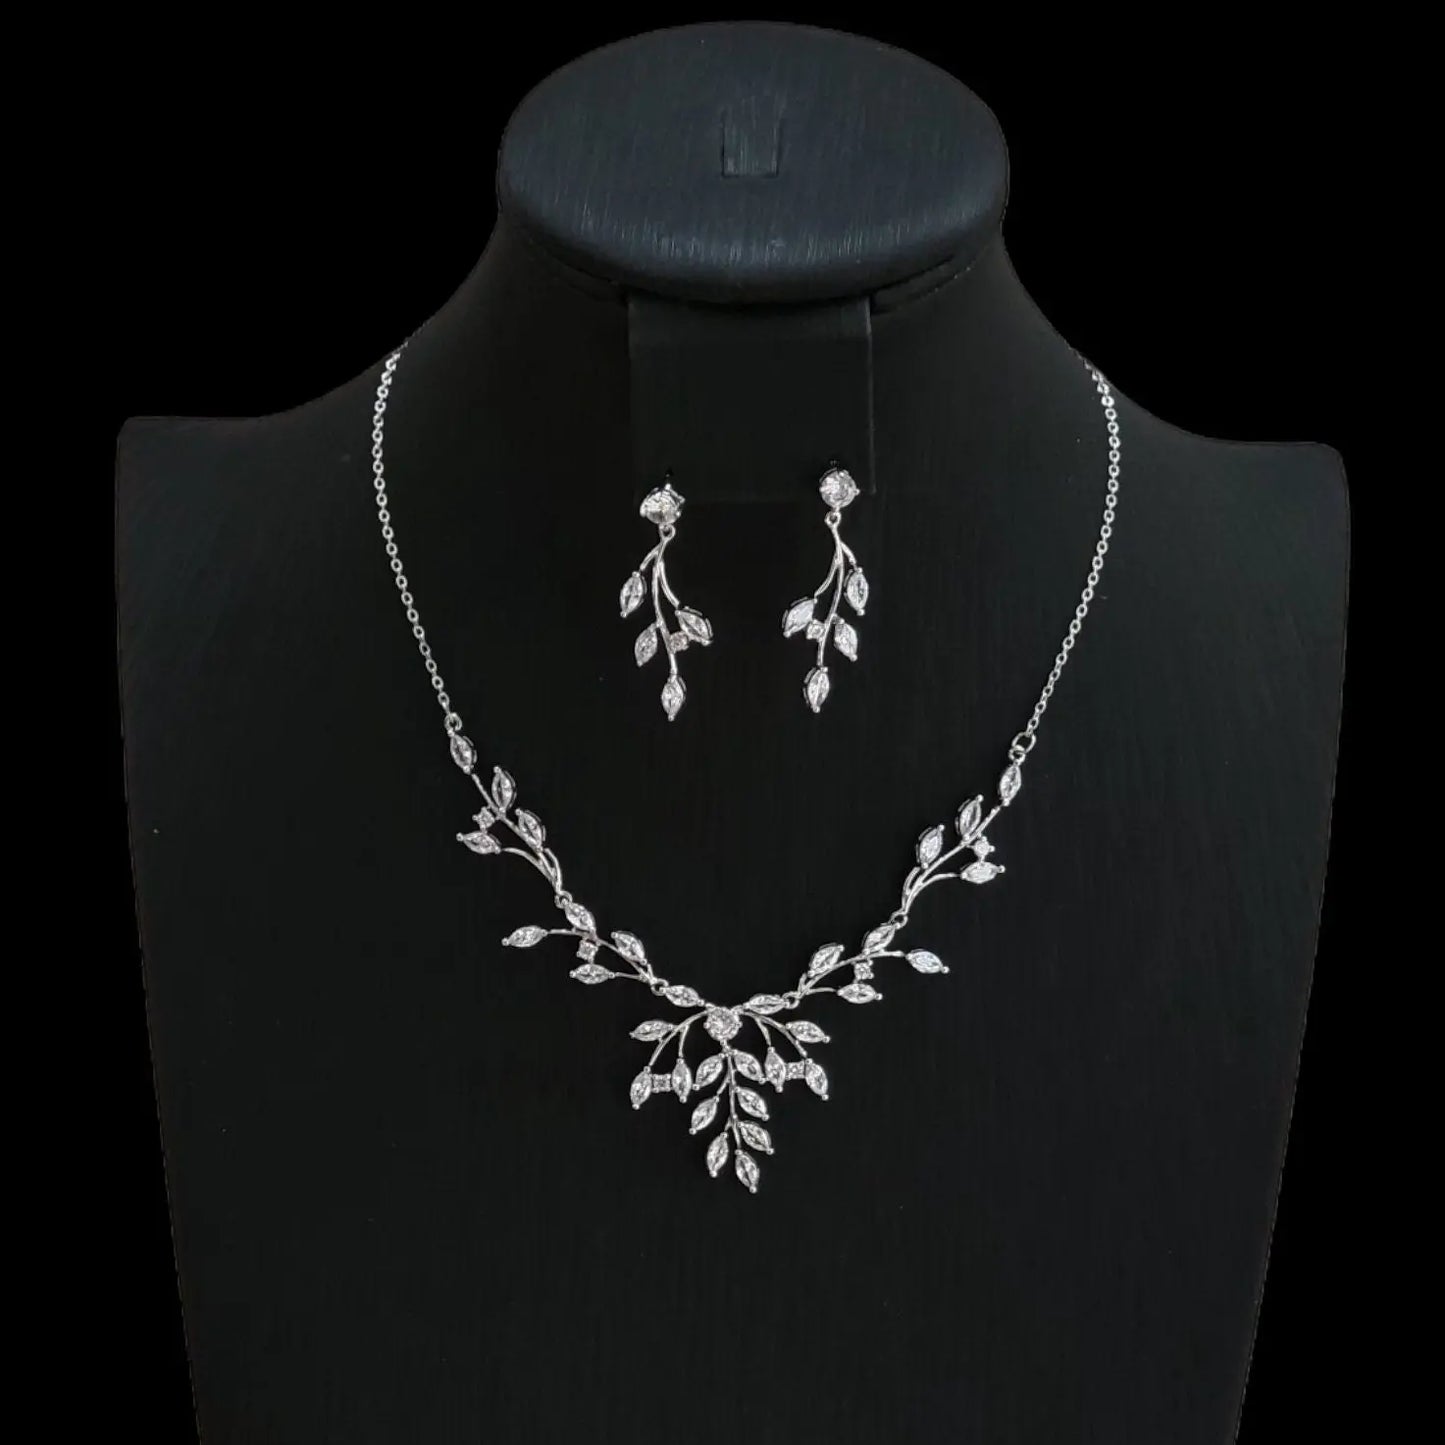 Luxury Leaf Statement Necklace | Crystal Jewelry Necklace and Earrings - Silver Kebble Jewelry